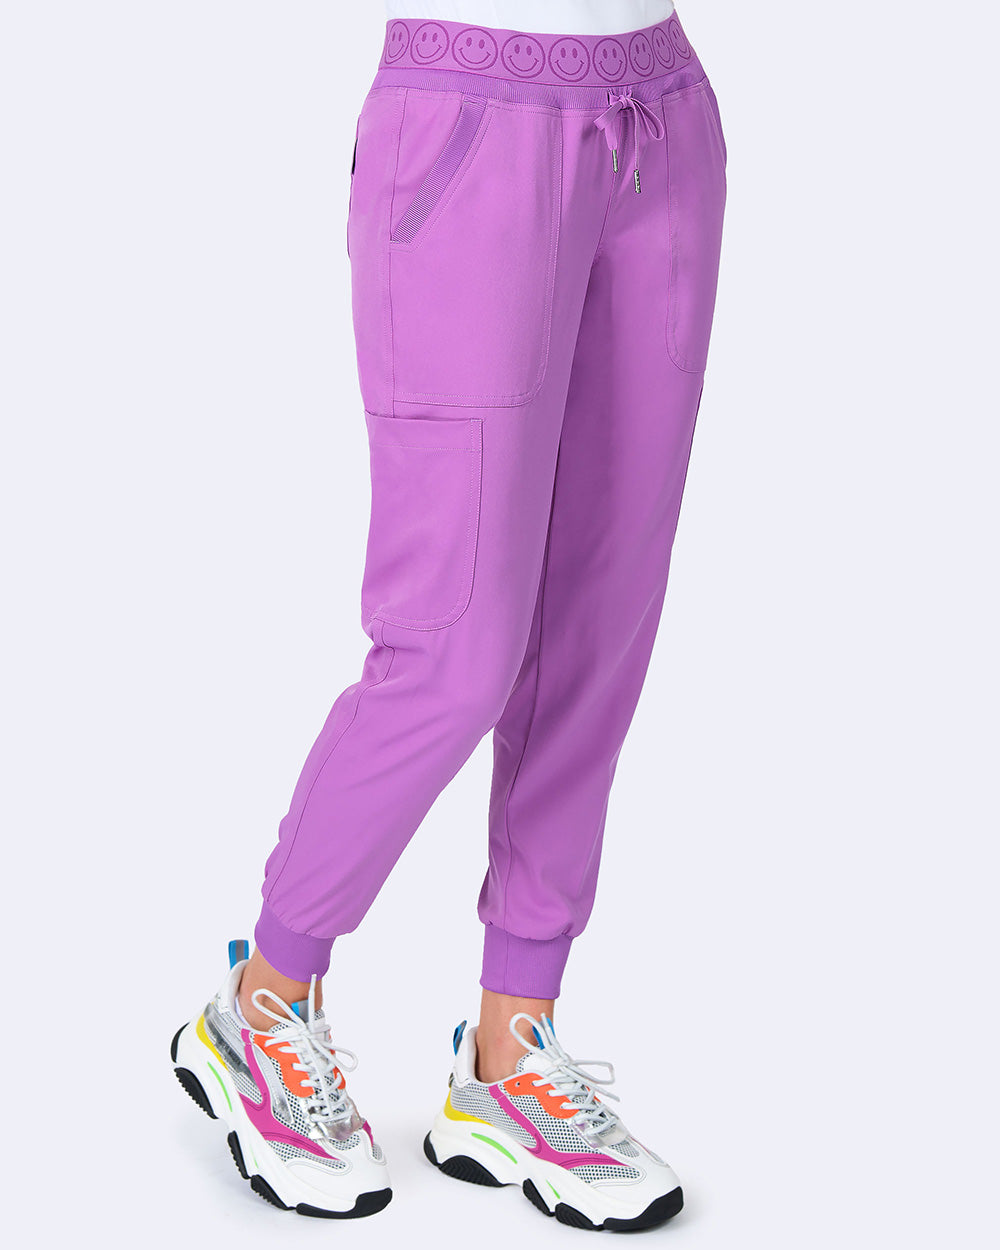 Ava Therese Smiley Jogger Pants